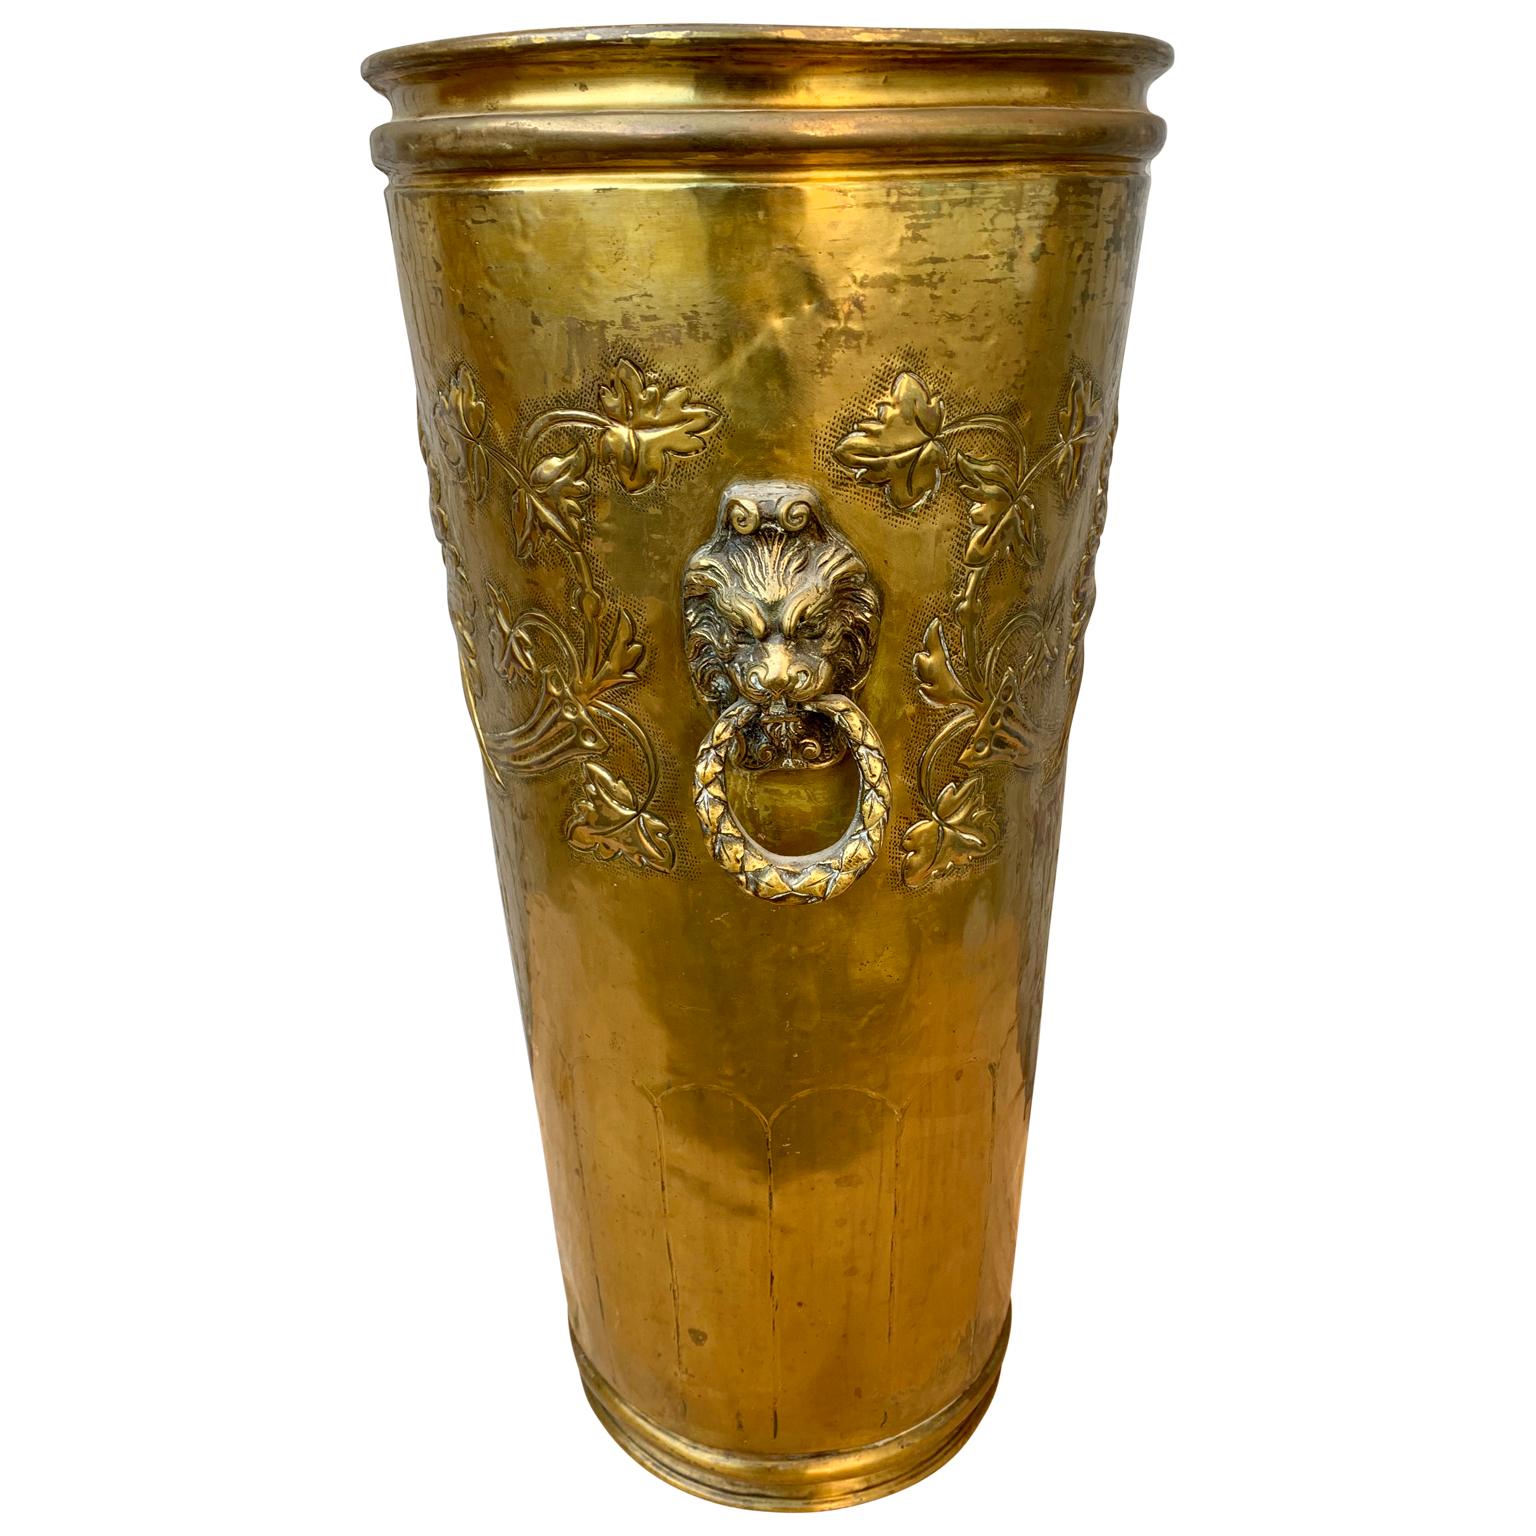 A late 19th century Belgian brass umbrella stand with mythological decorations. Marked E Houbil and with the name of the city of Dinant, Vallonie region of Belgium.